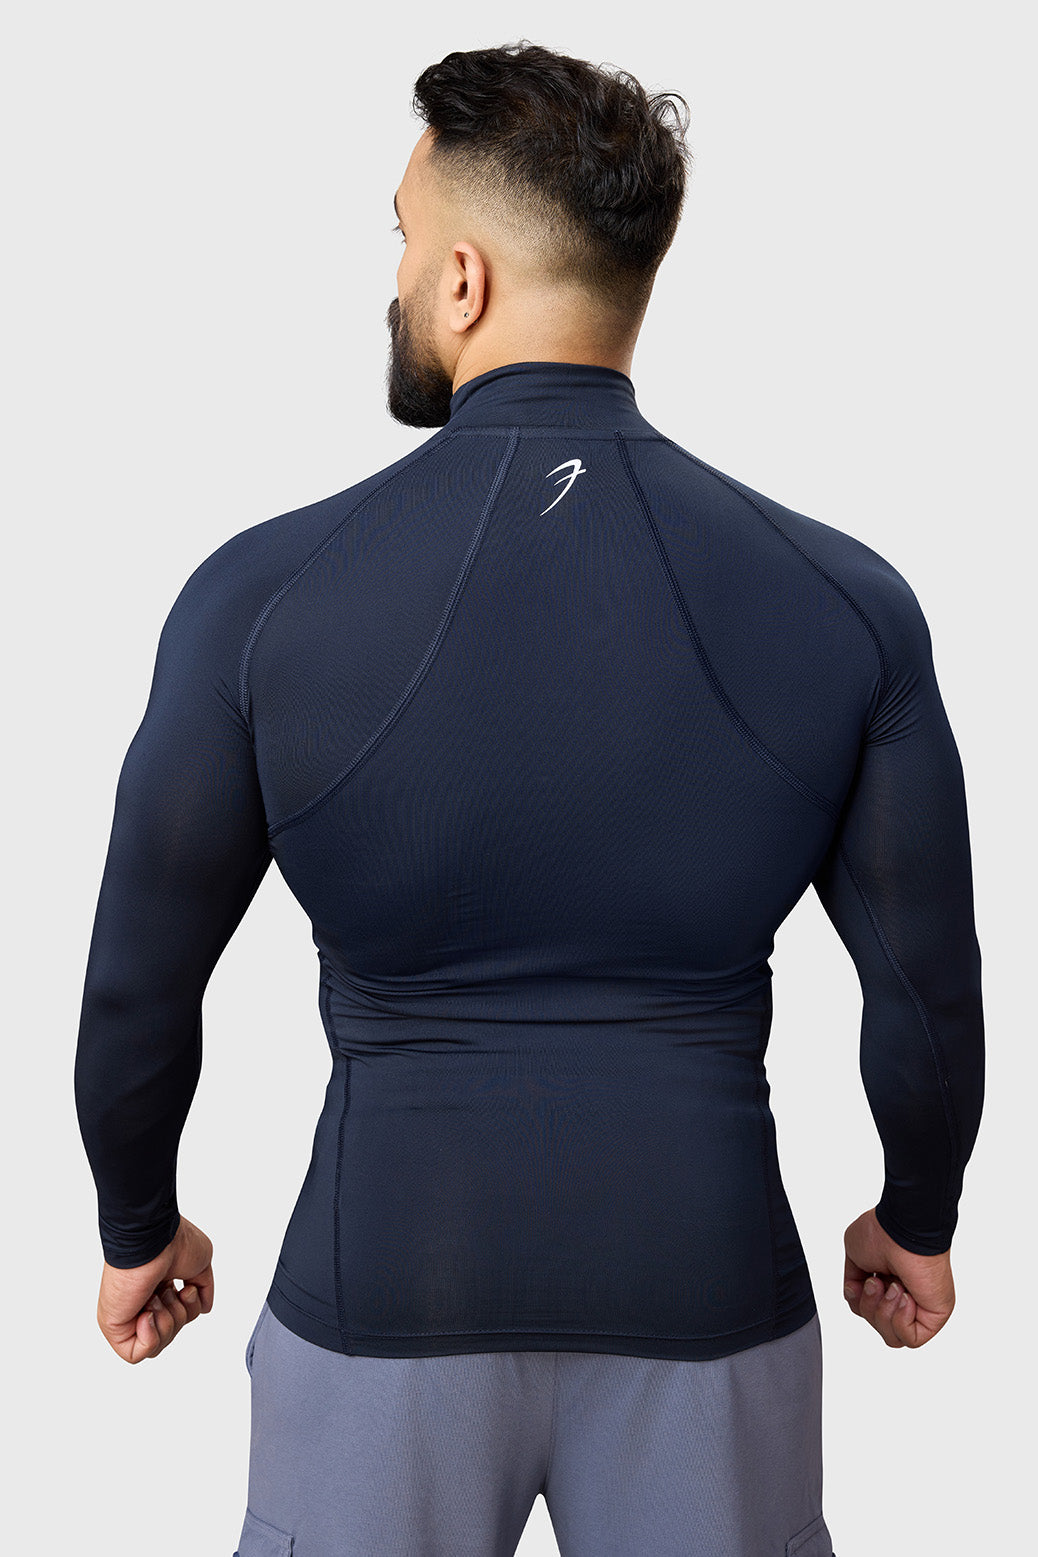 High Neck Compression Full Sleeves T-shirt Navy